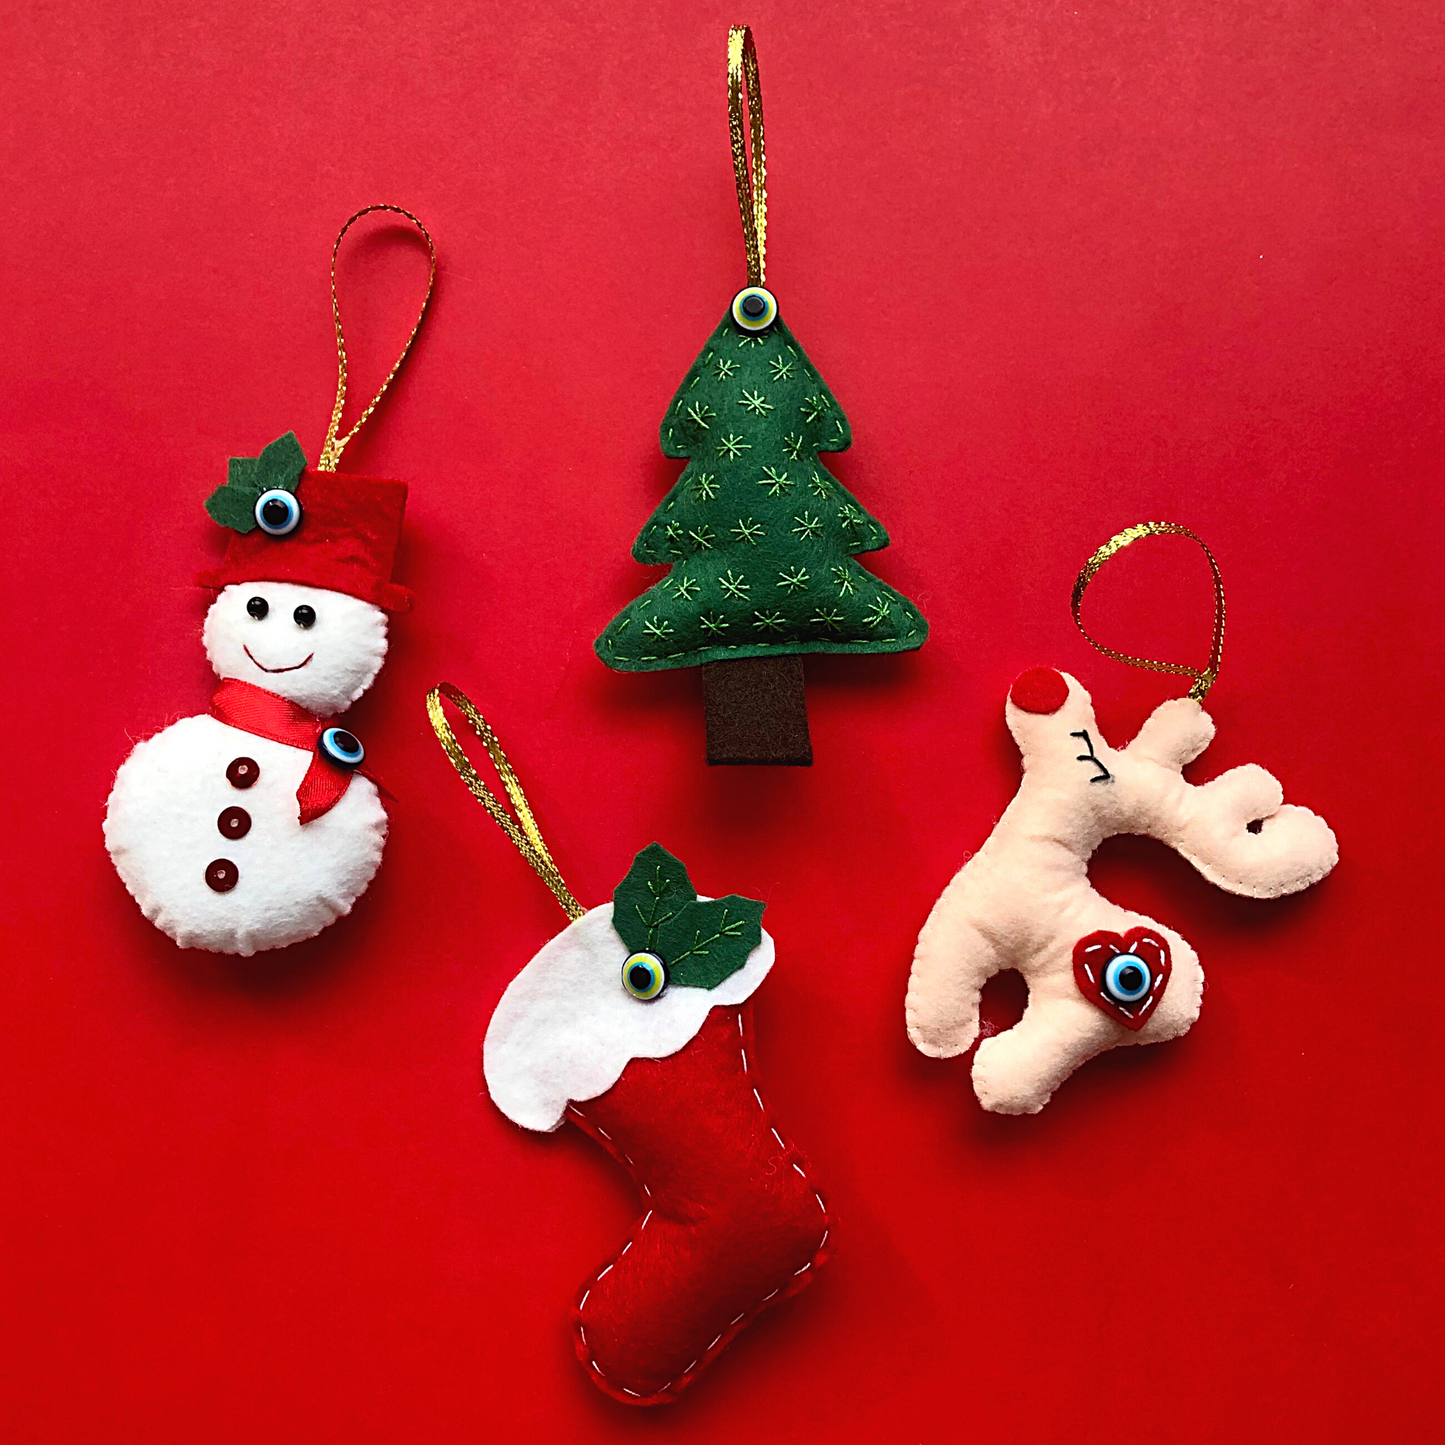 Felt Christmas ornaments featuring a snowman, tree, stocking, and reindeer, each adorned with a protective blue 'nazar' evil eye bead, set against a red background